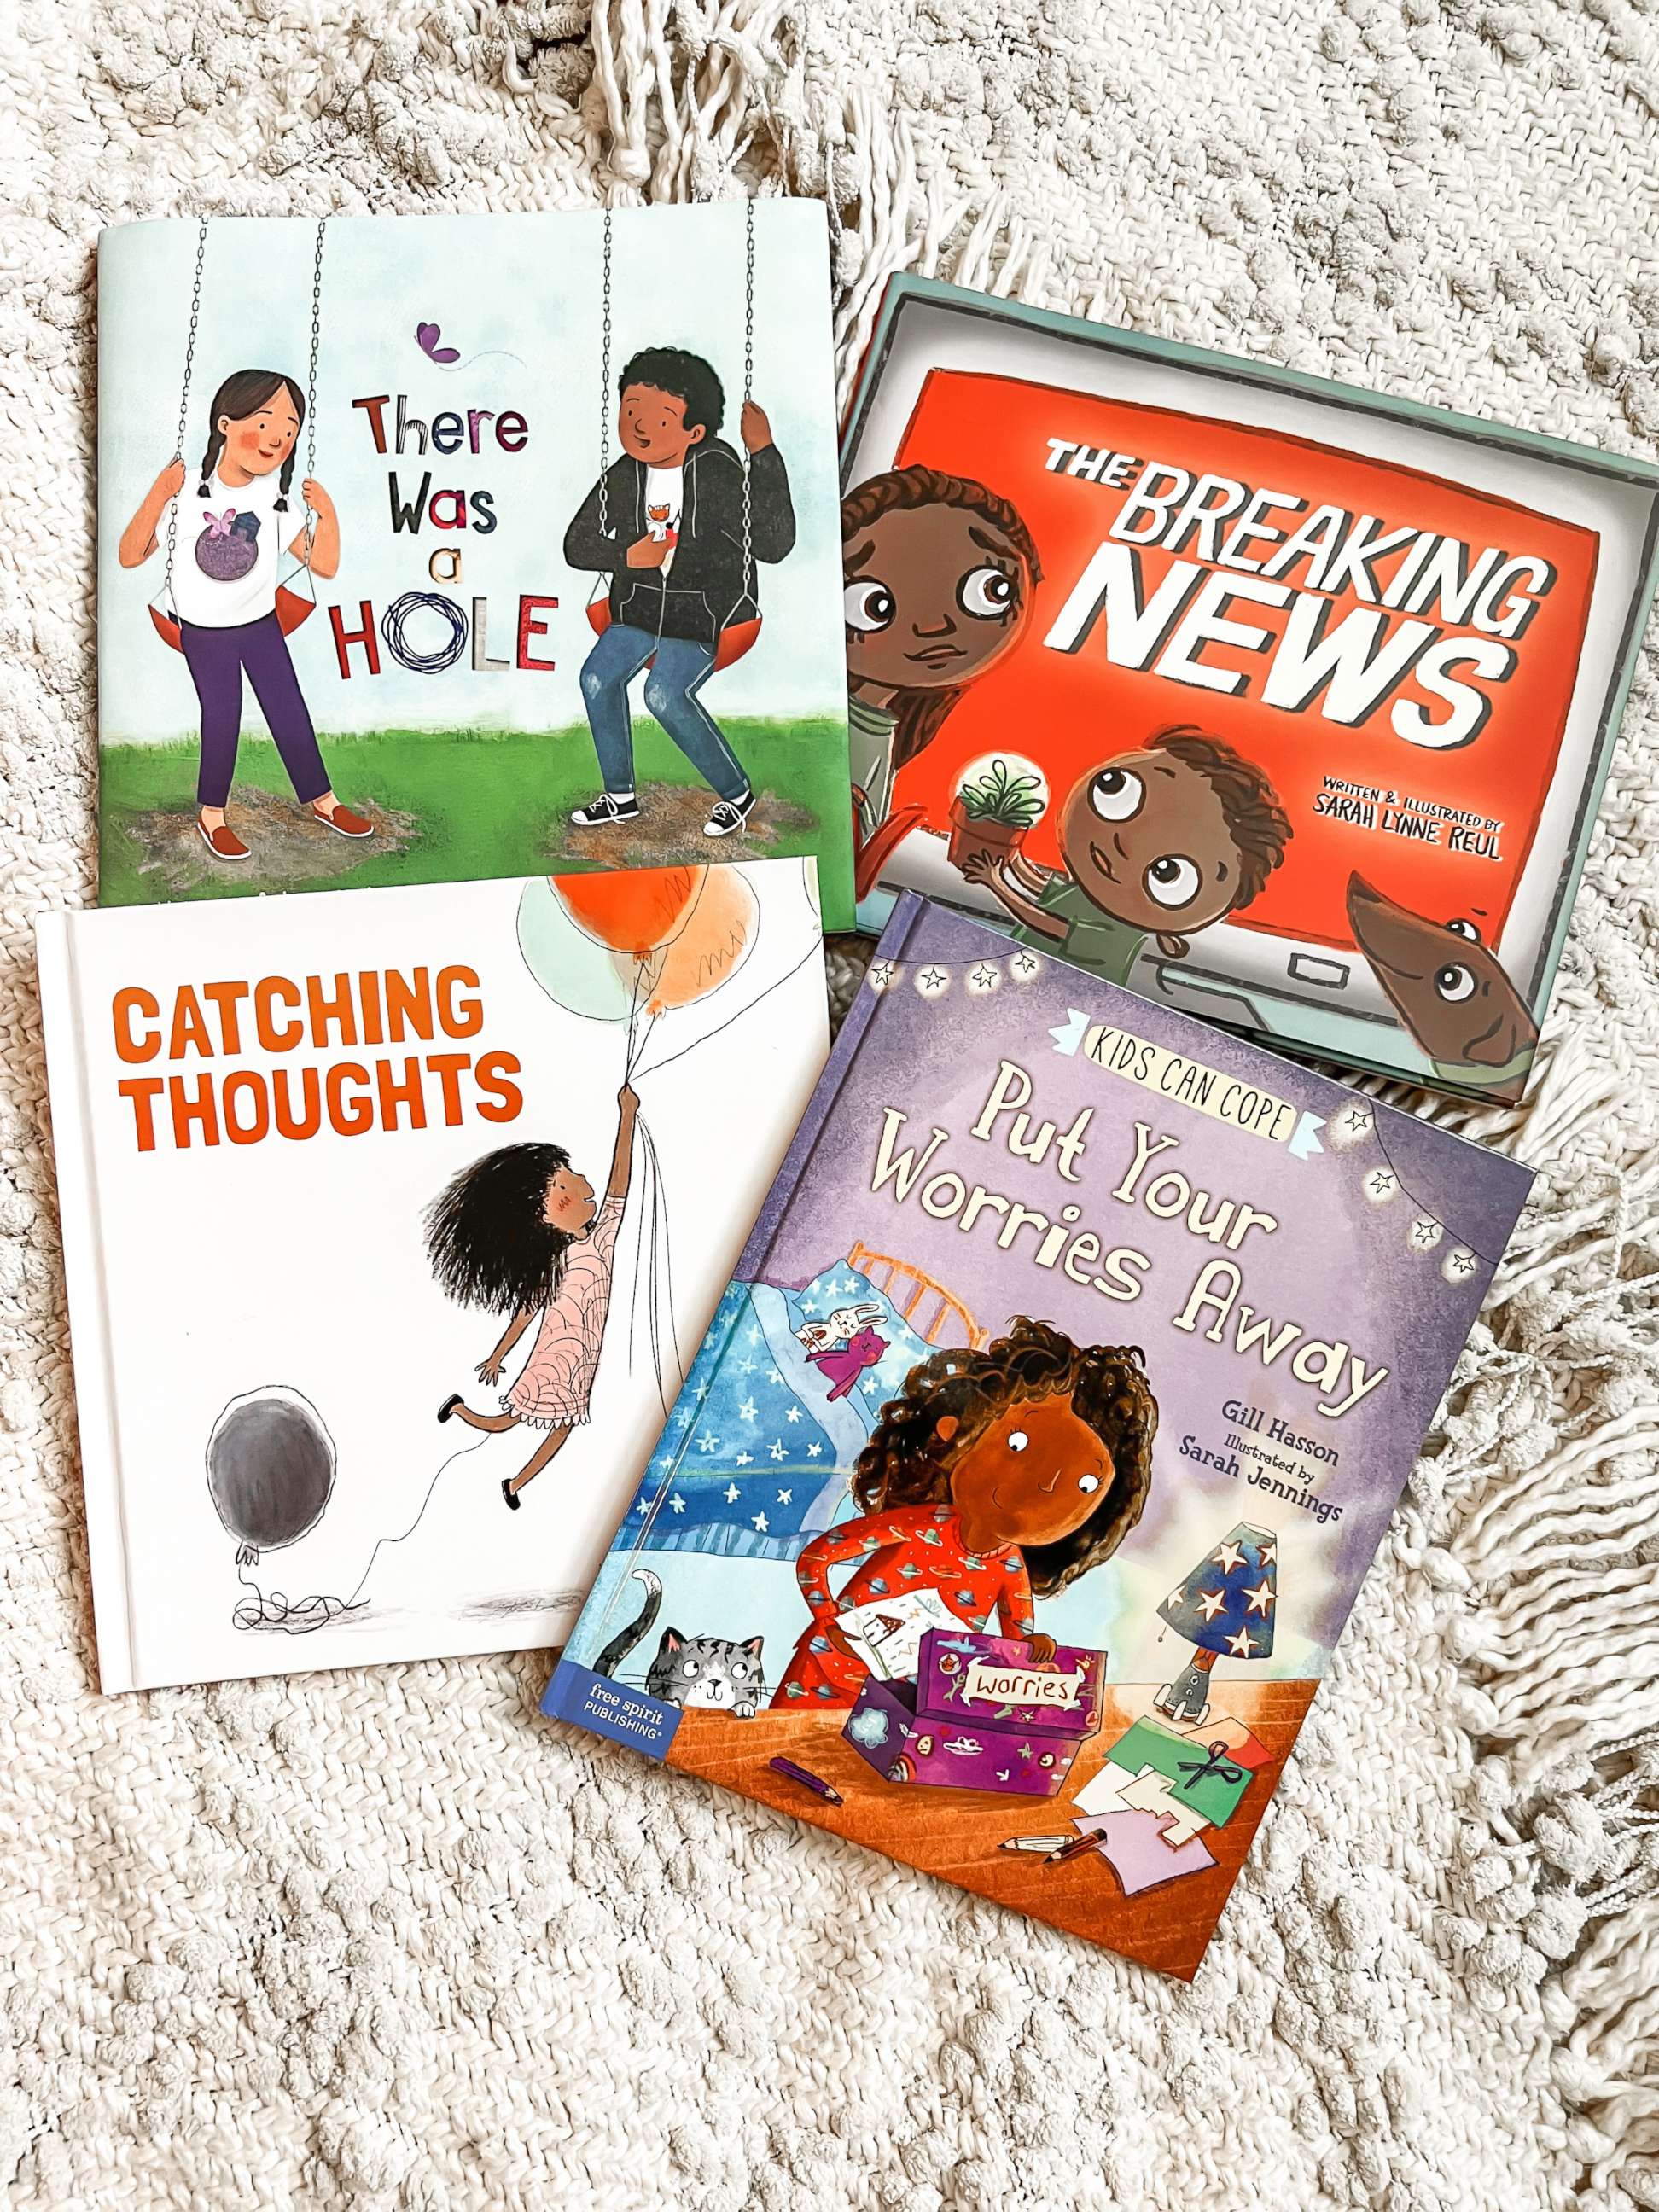 PHOTO: Picture books can help young children relate to the world around them and process their emotions following traumatic news or events.